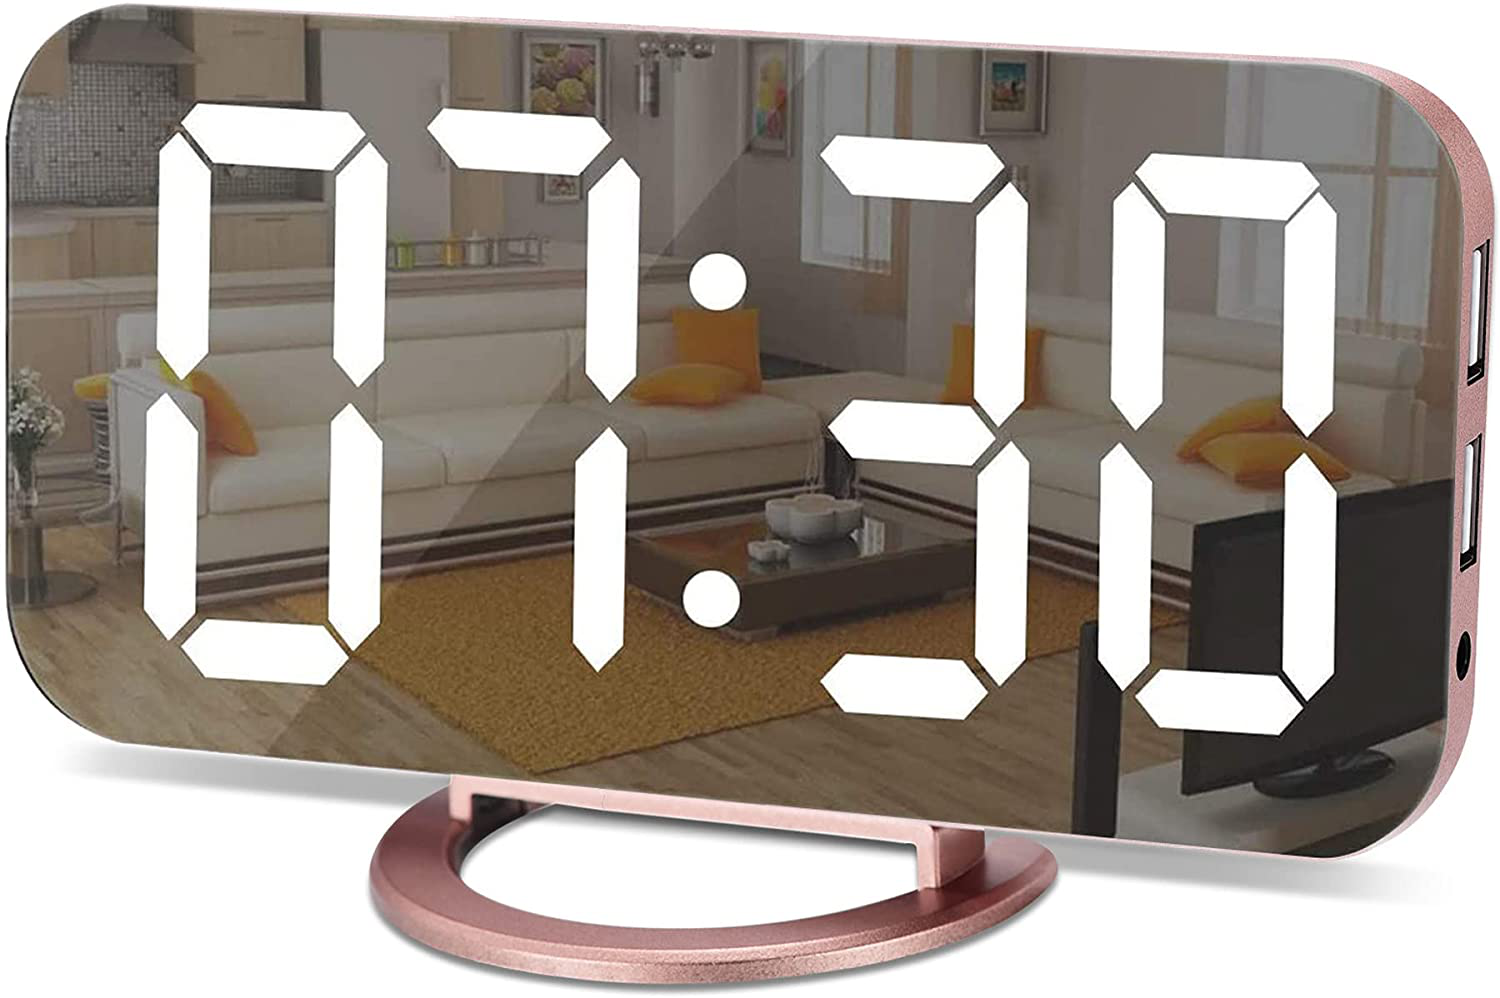 Alarm Clock for Bedroom,LED and Mirror Digital Clock Large Display,with Dual USB Charger Ports,Auto Dim,Snooze Mode,Modern Desk/Wall Electronic Clock for Girl Woman Mom Teens - Rose Gold